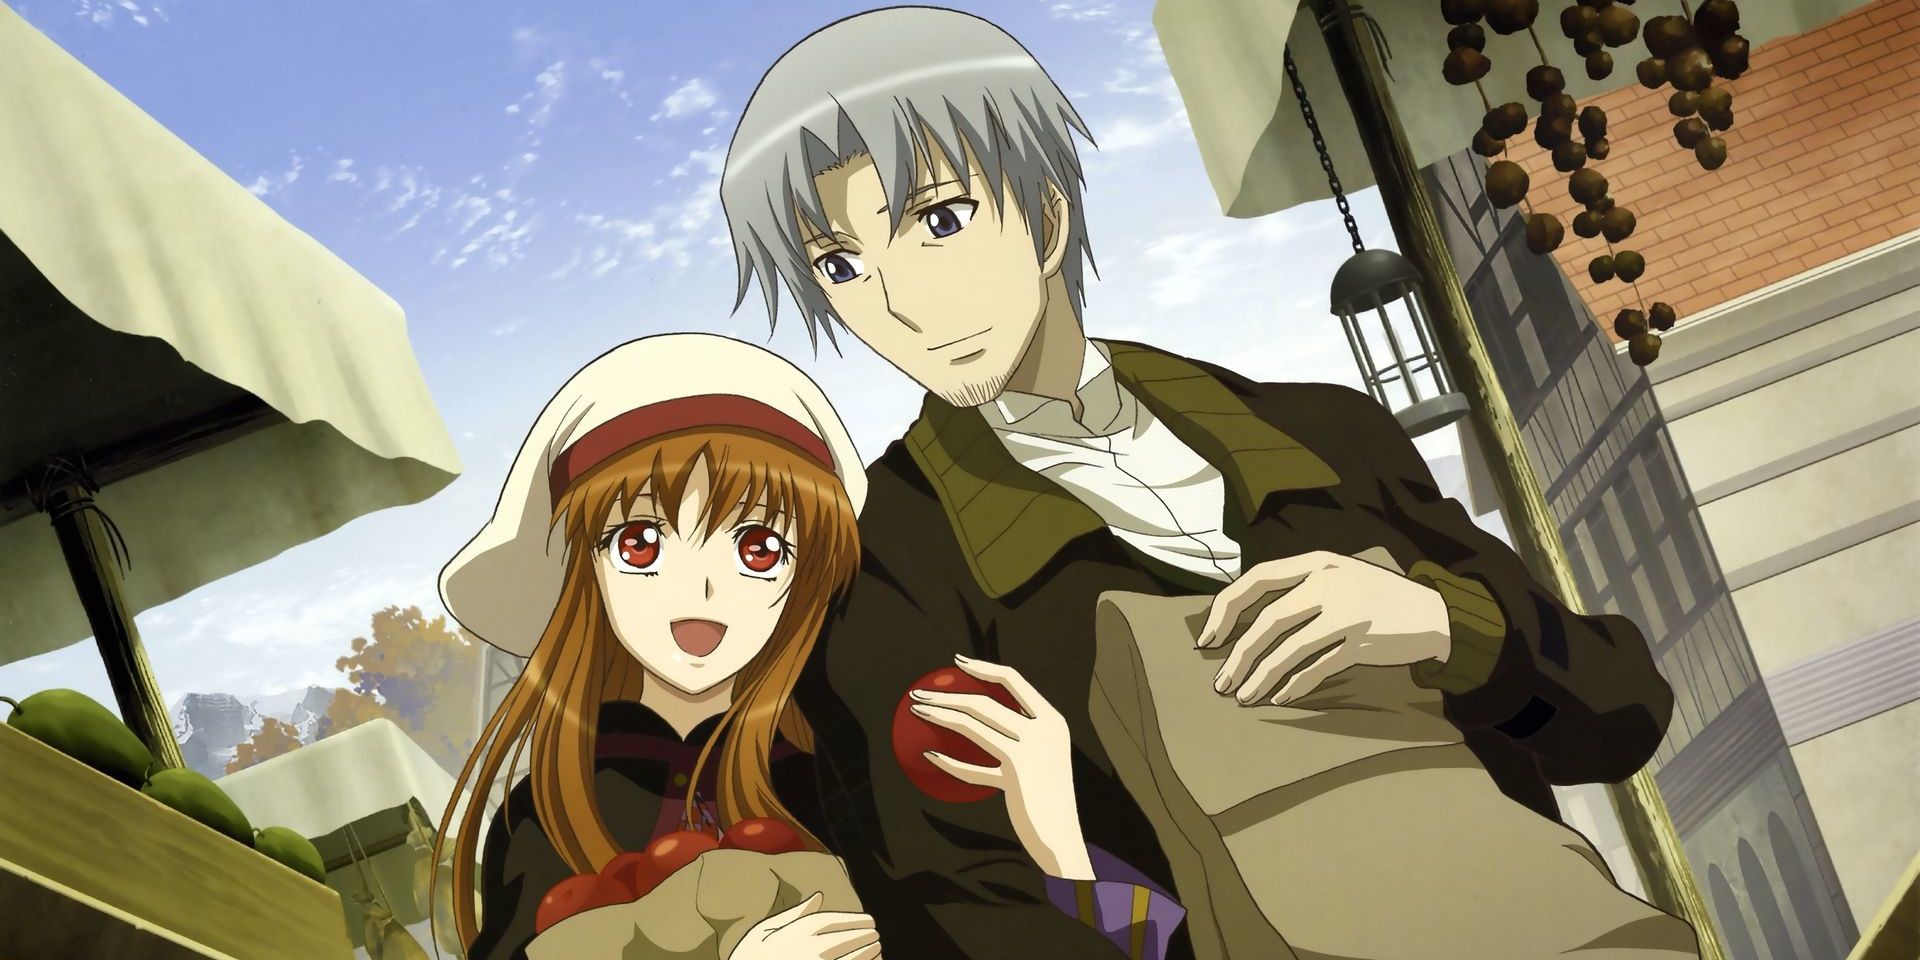 holo and lawrence from spice and wolf